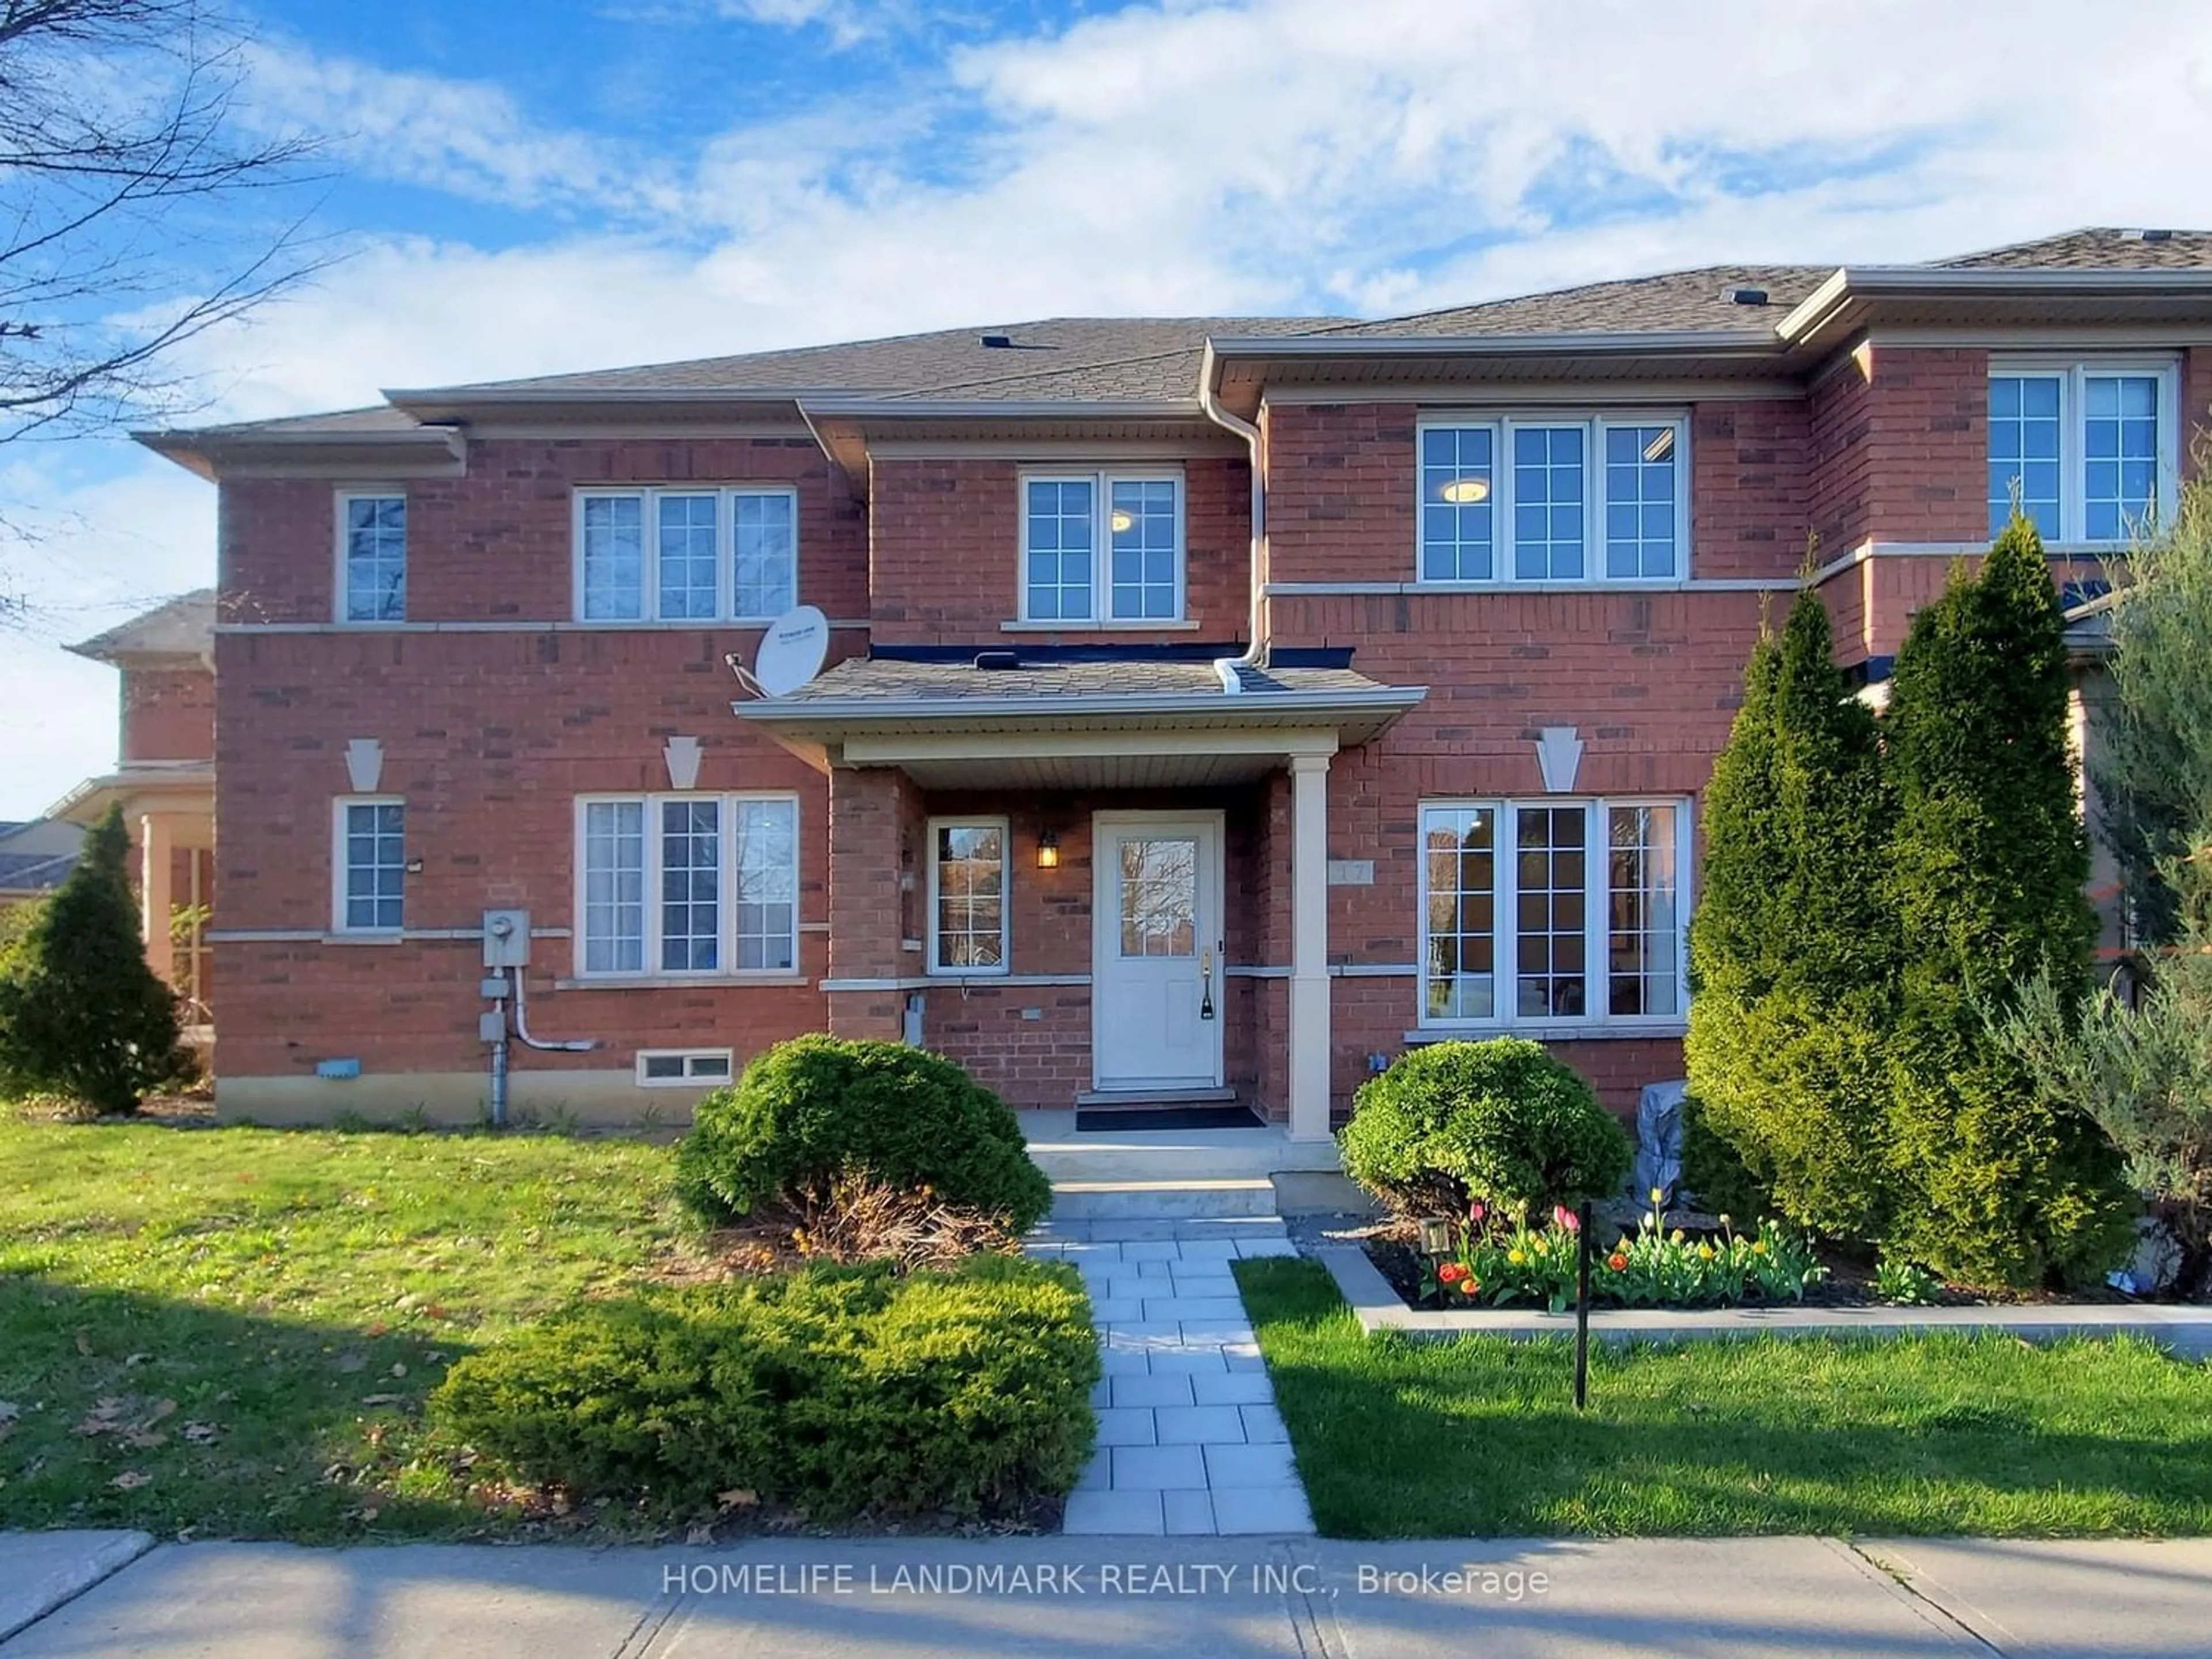 Home with brick exterior material for 17 Charing Cross Lane, Markham Ontario L6E 0A1